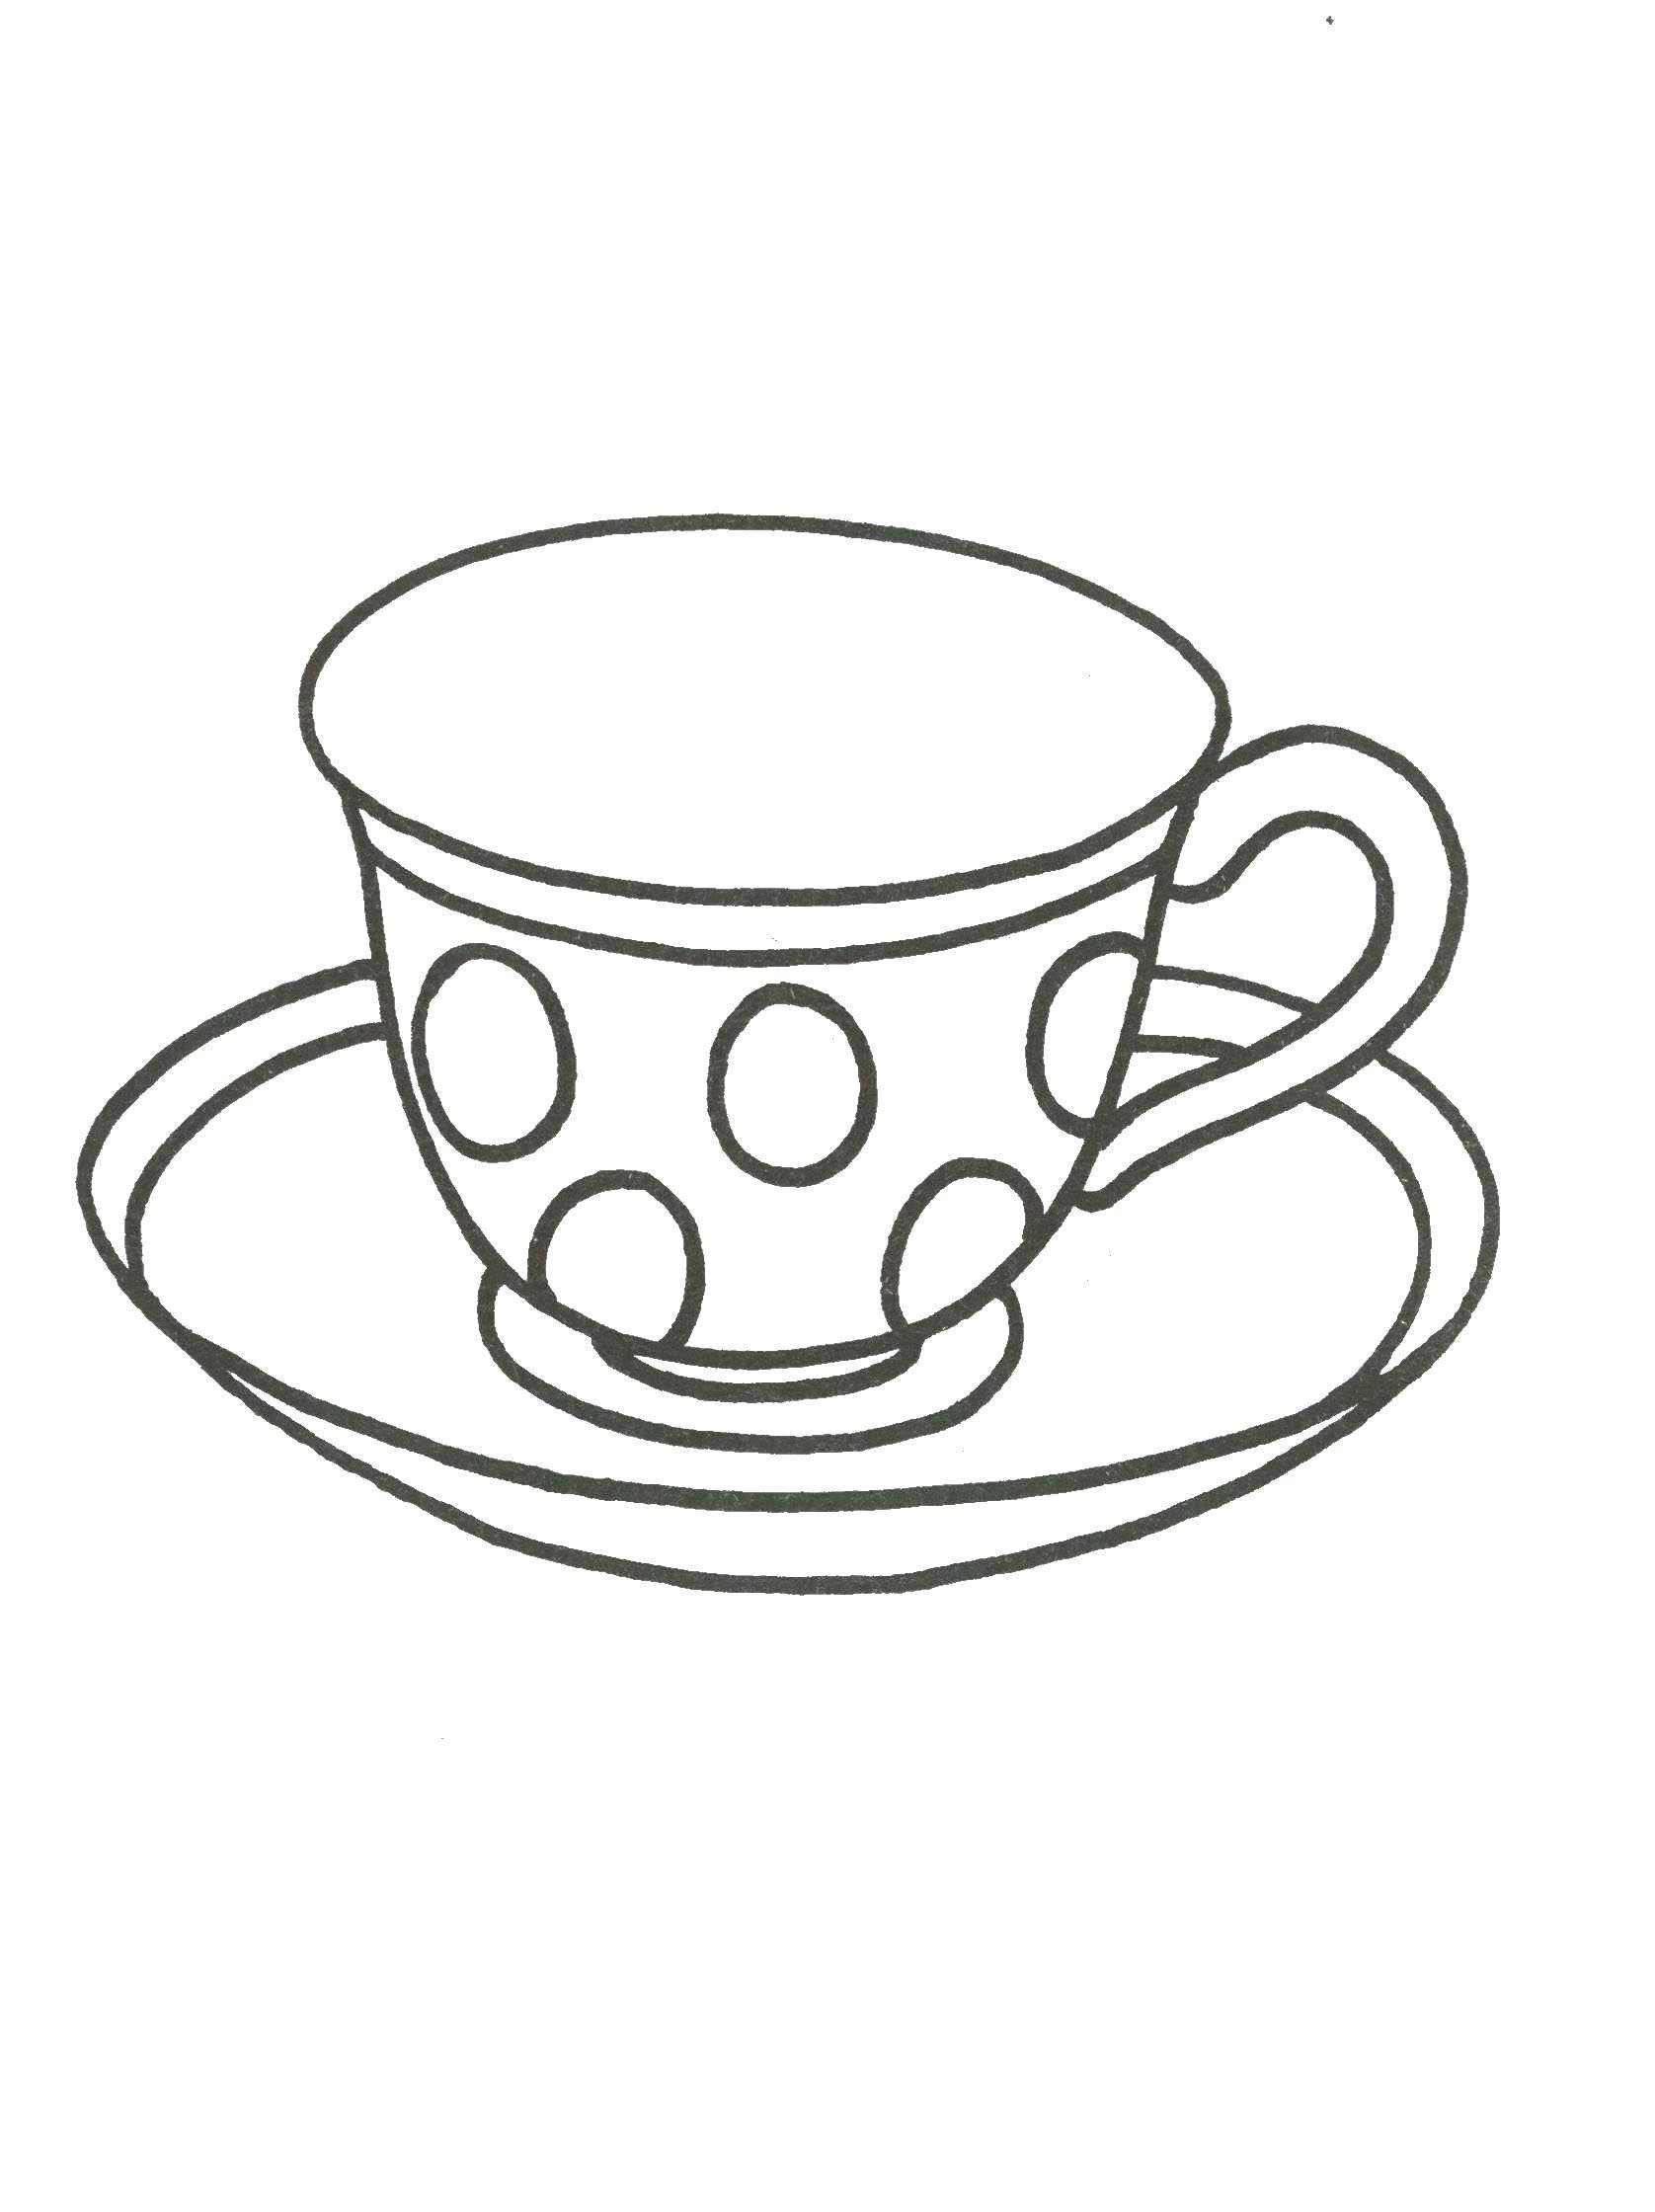 Coloring Cup with saucer. Category dishes. Tags:  crockery, Cup, mug, plate.